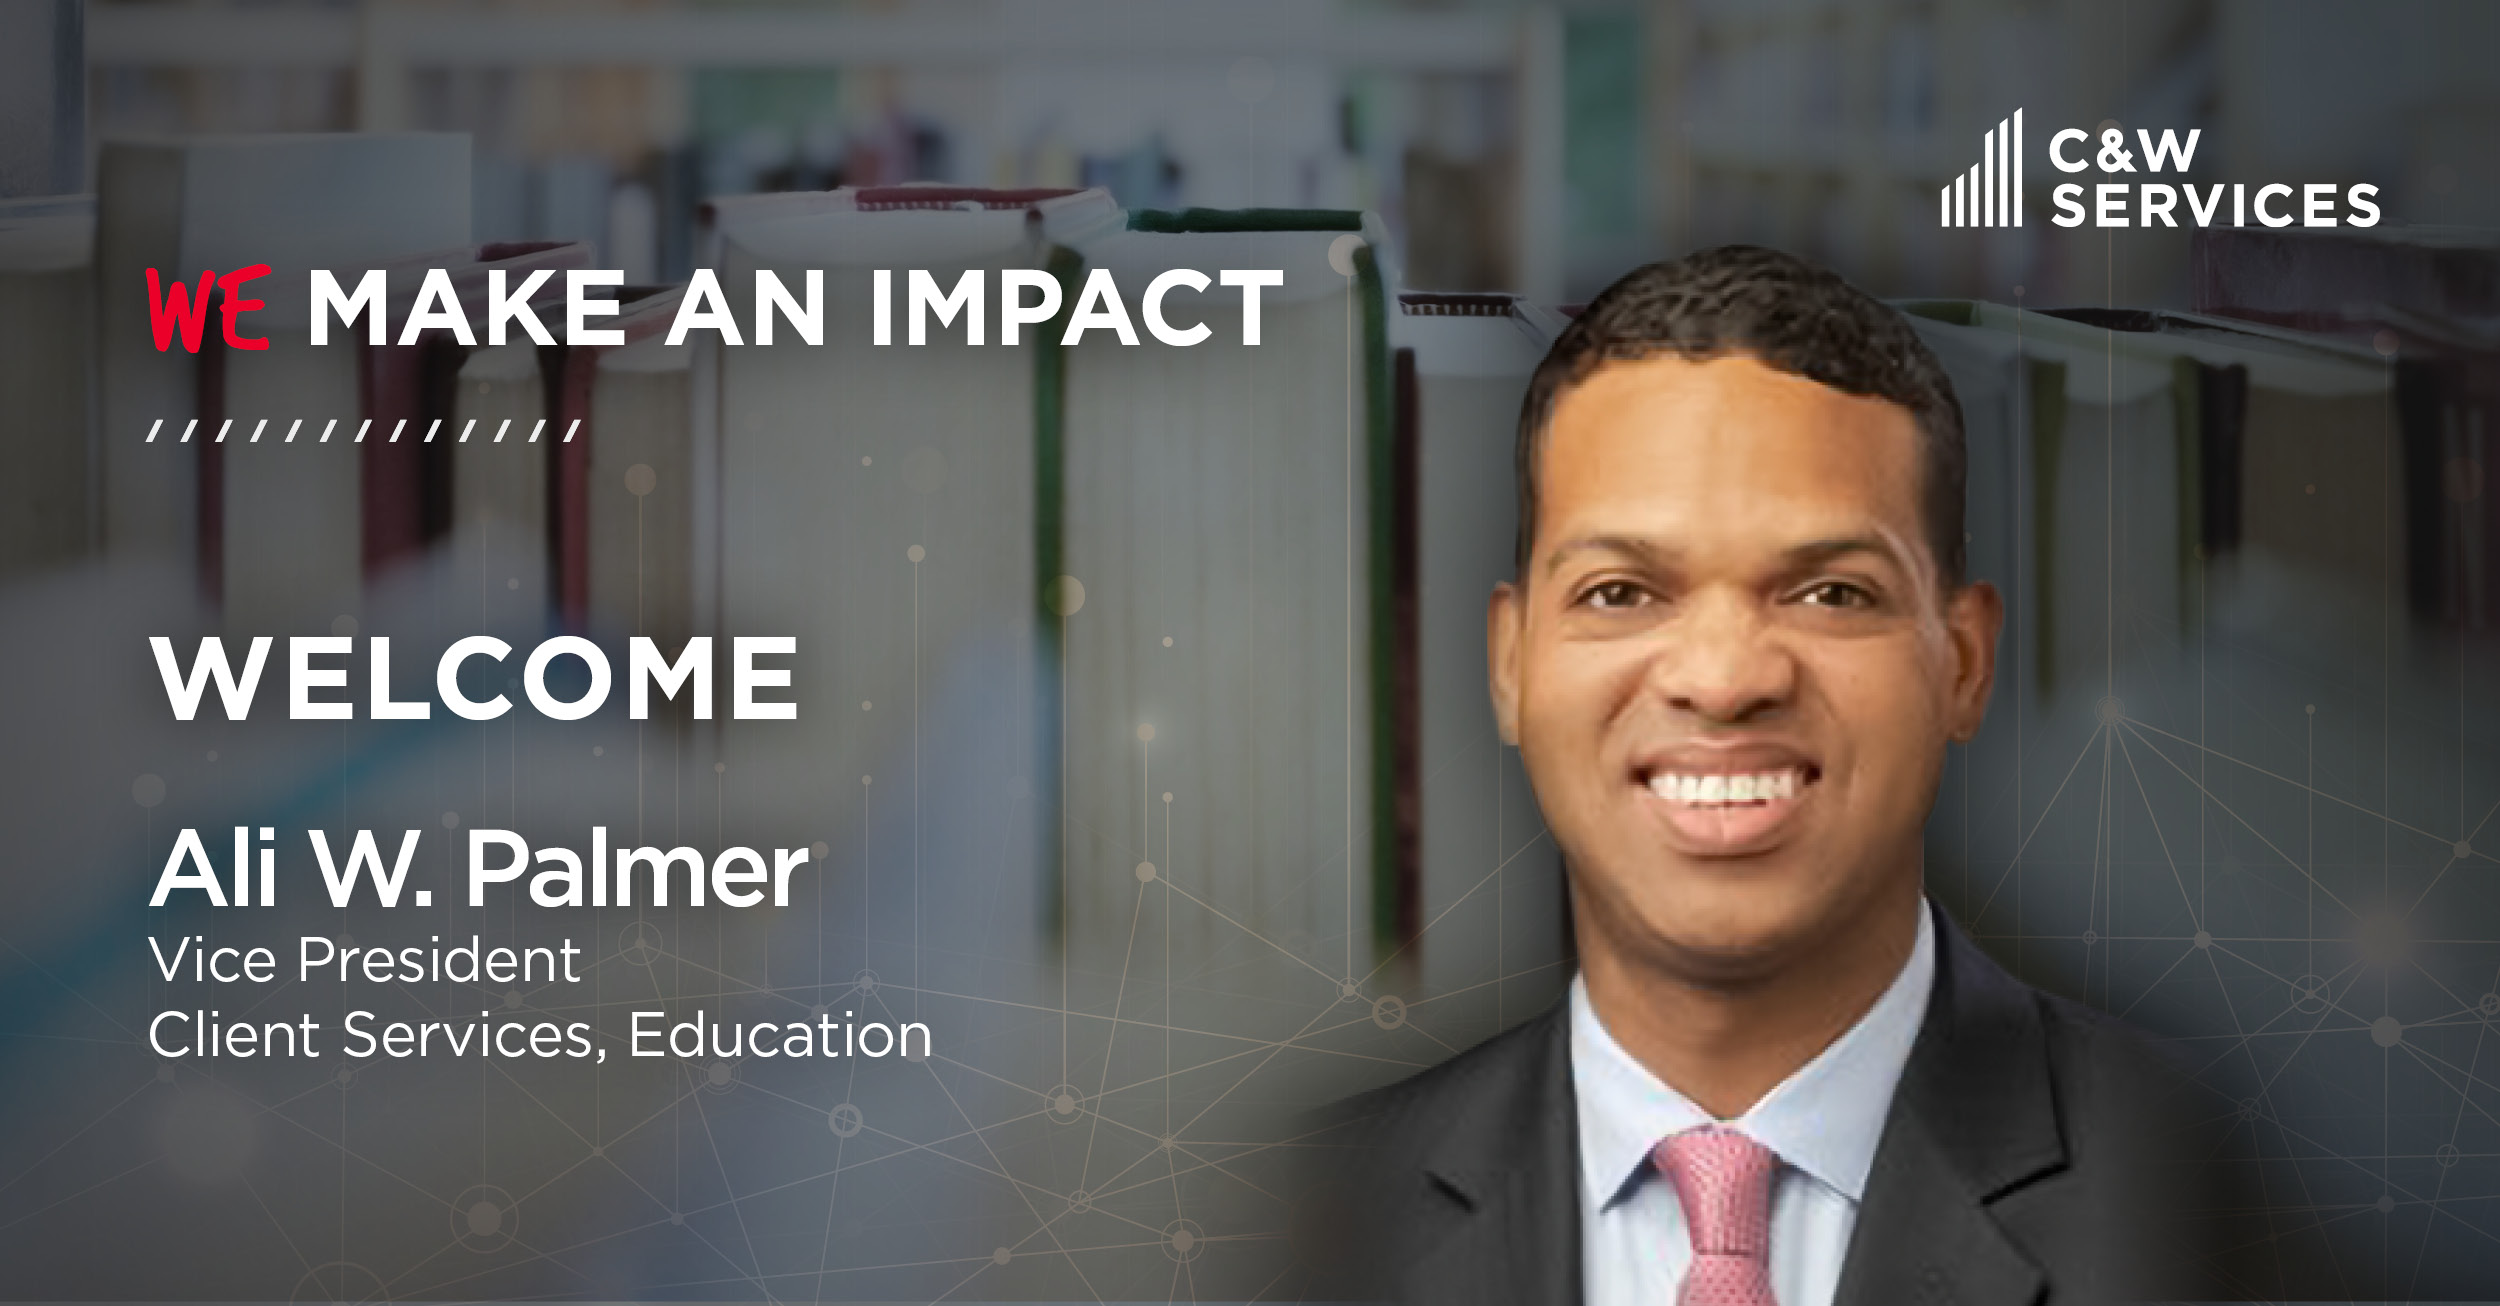 We make an impact: Welcome Ali W. Palmer, Vice President, Client Services, Education